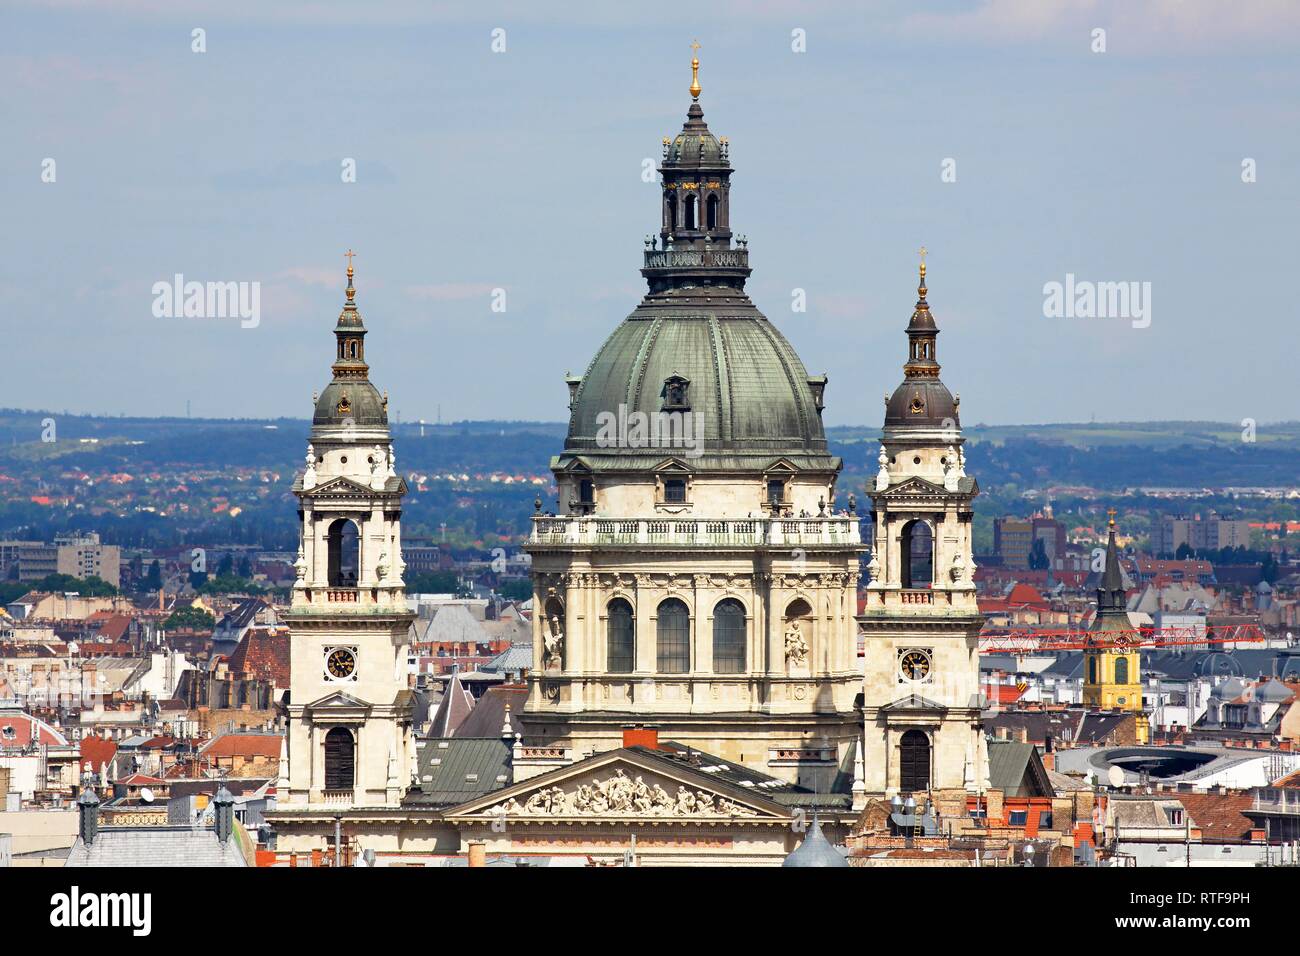 City view with St.-Stephans Basilica, Pest district, Budapest, Hungary Stock Photo